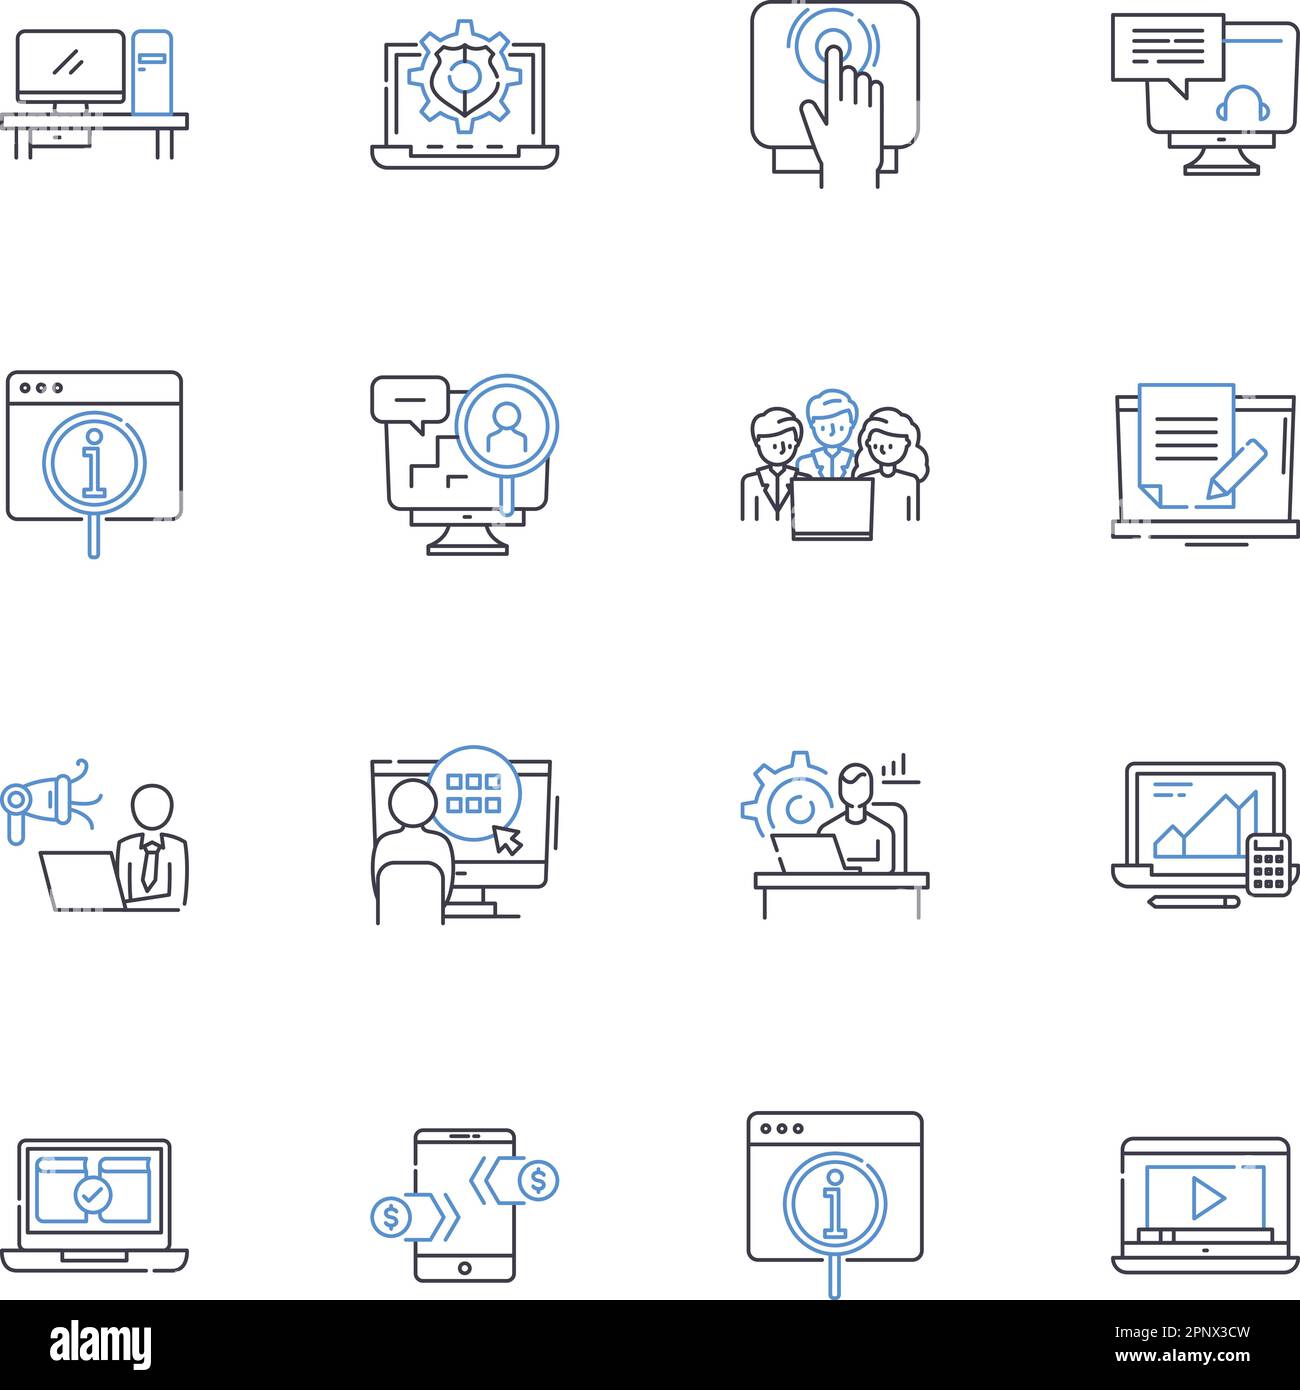 Market research line icons collection. Surveys, Data, Analysis, Insights, Demographics, Focus groups, Sampling vector and linear illustration. Market Stock Vector